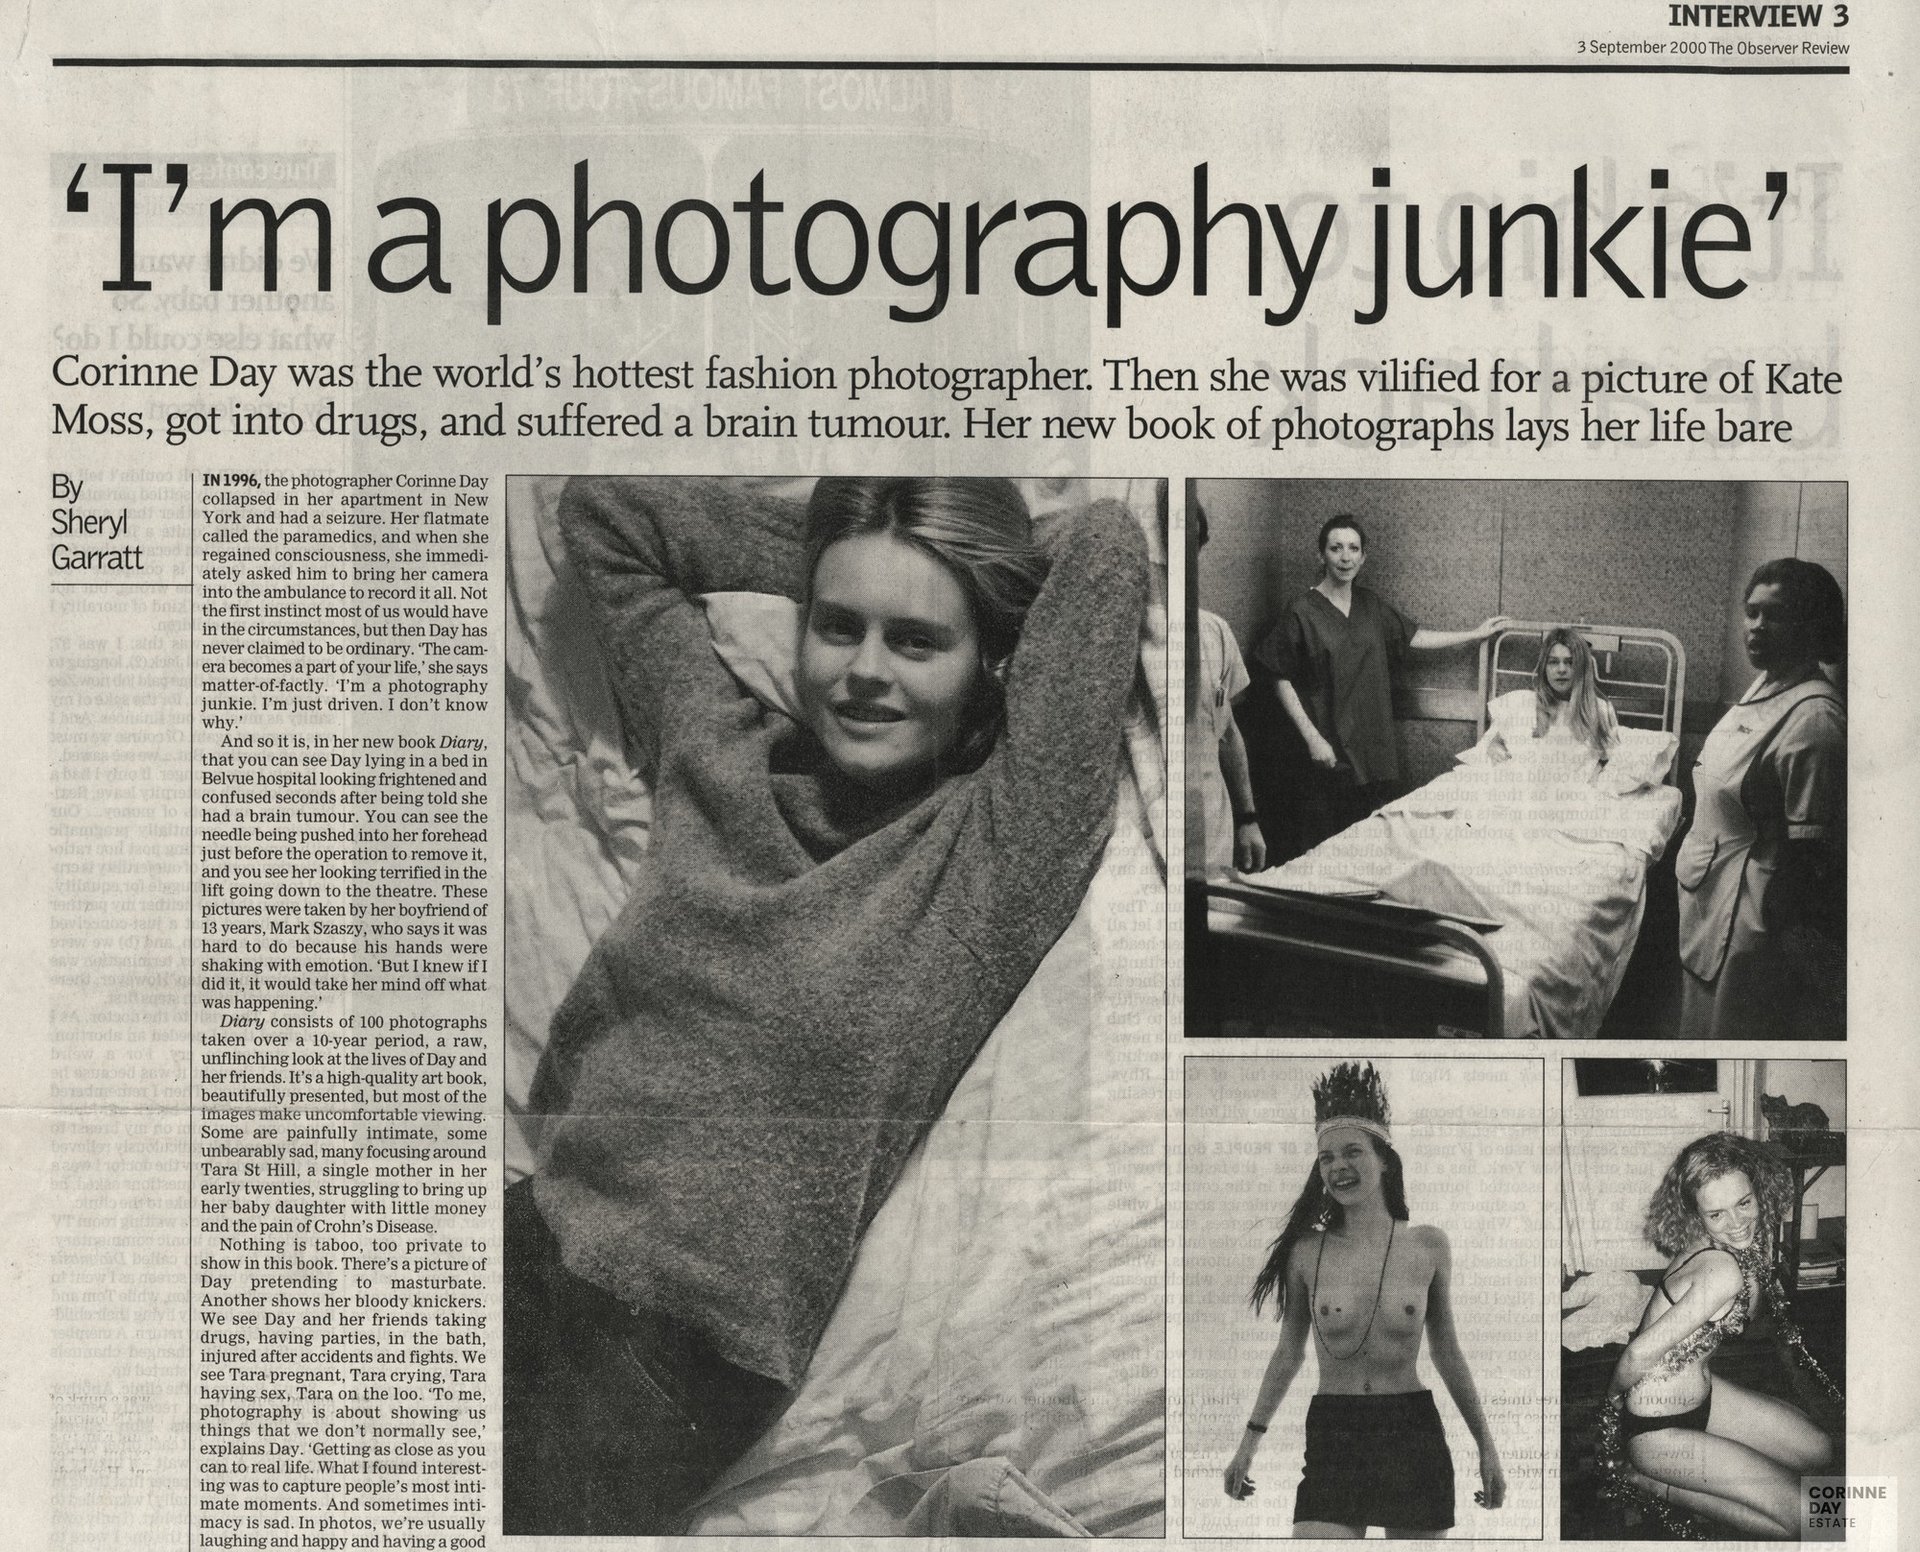 I'm a photography junkie, The Observer Review, 3 Sep 2000 — Image 1 of 2